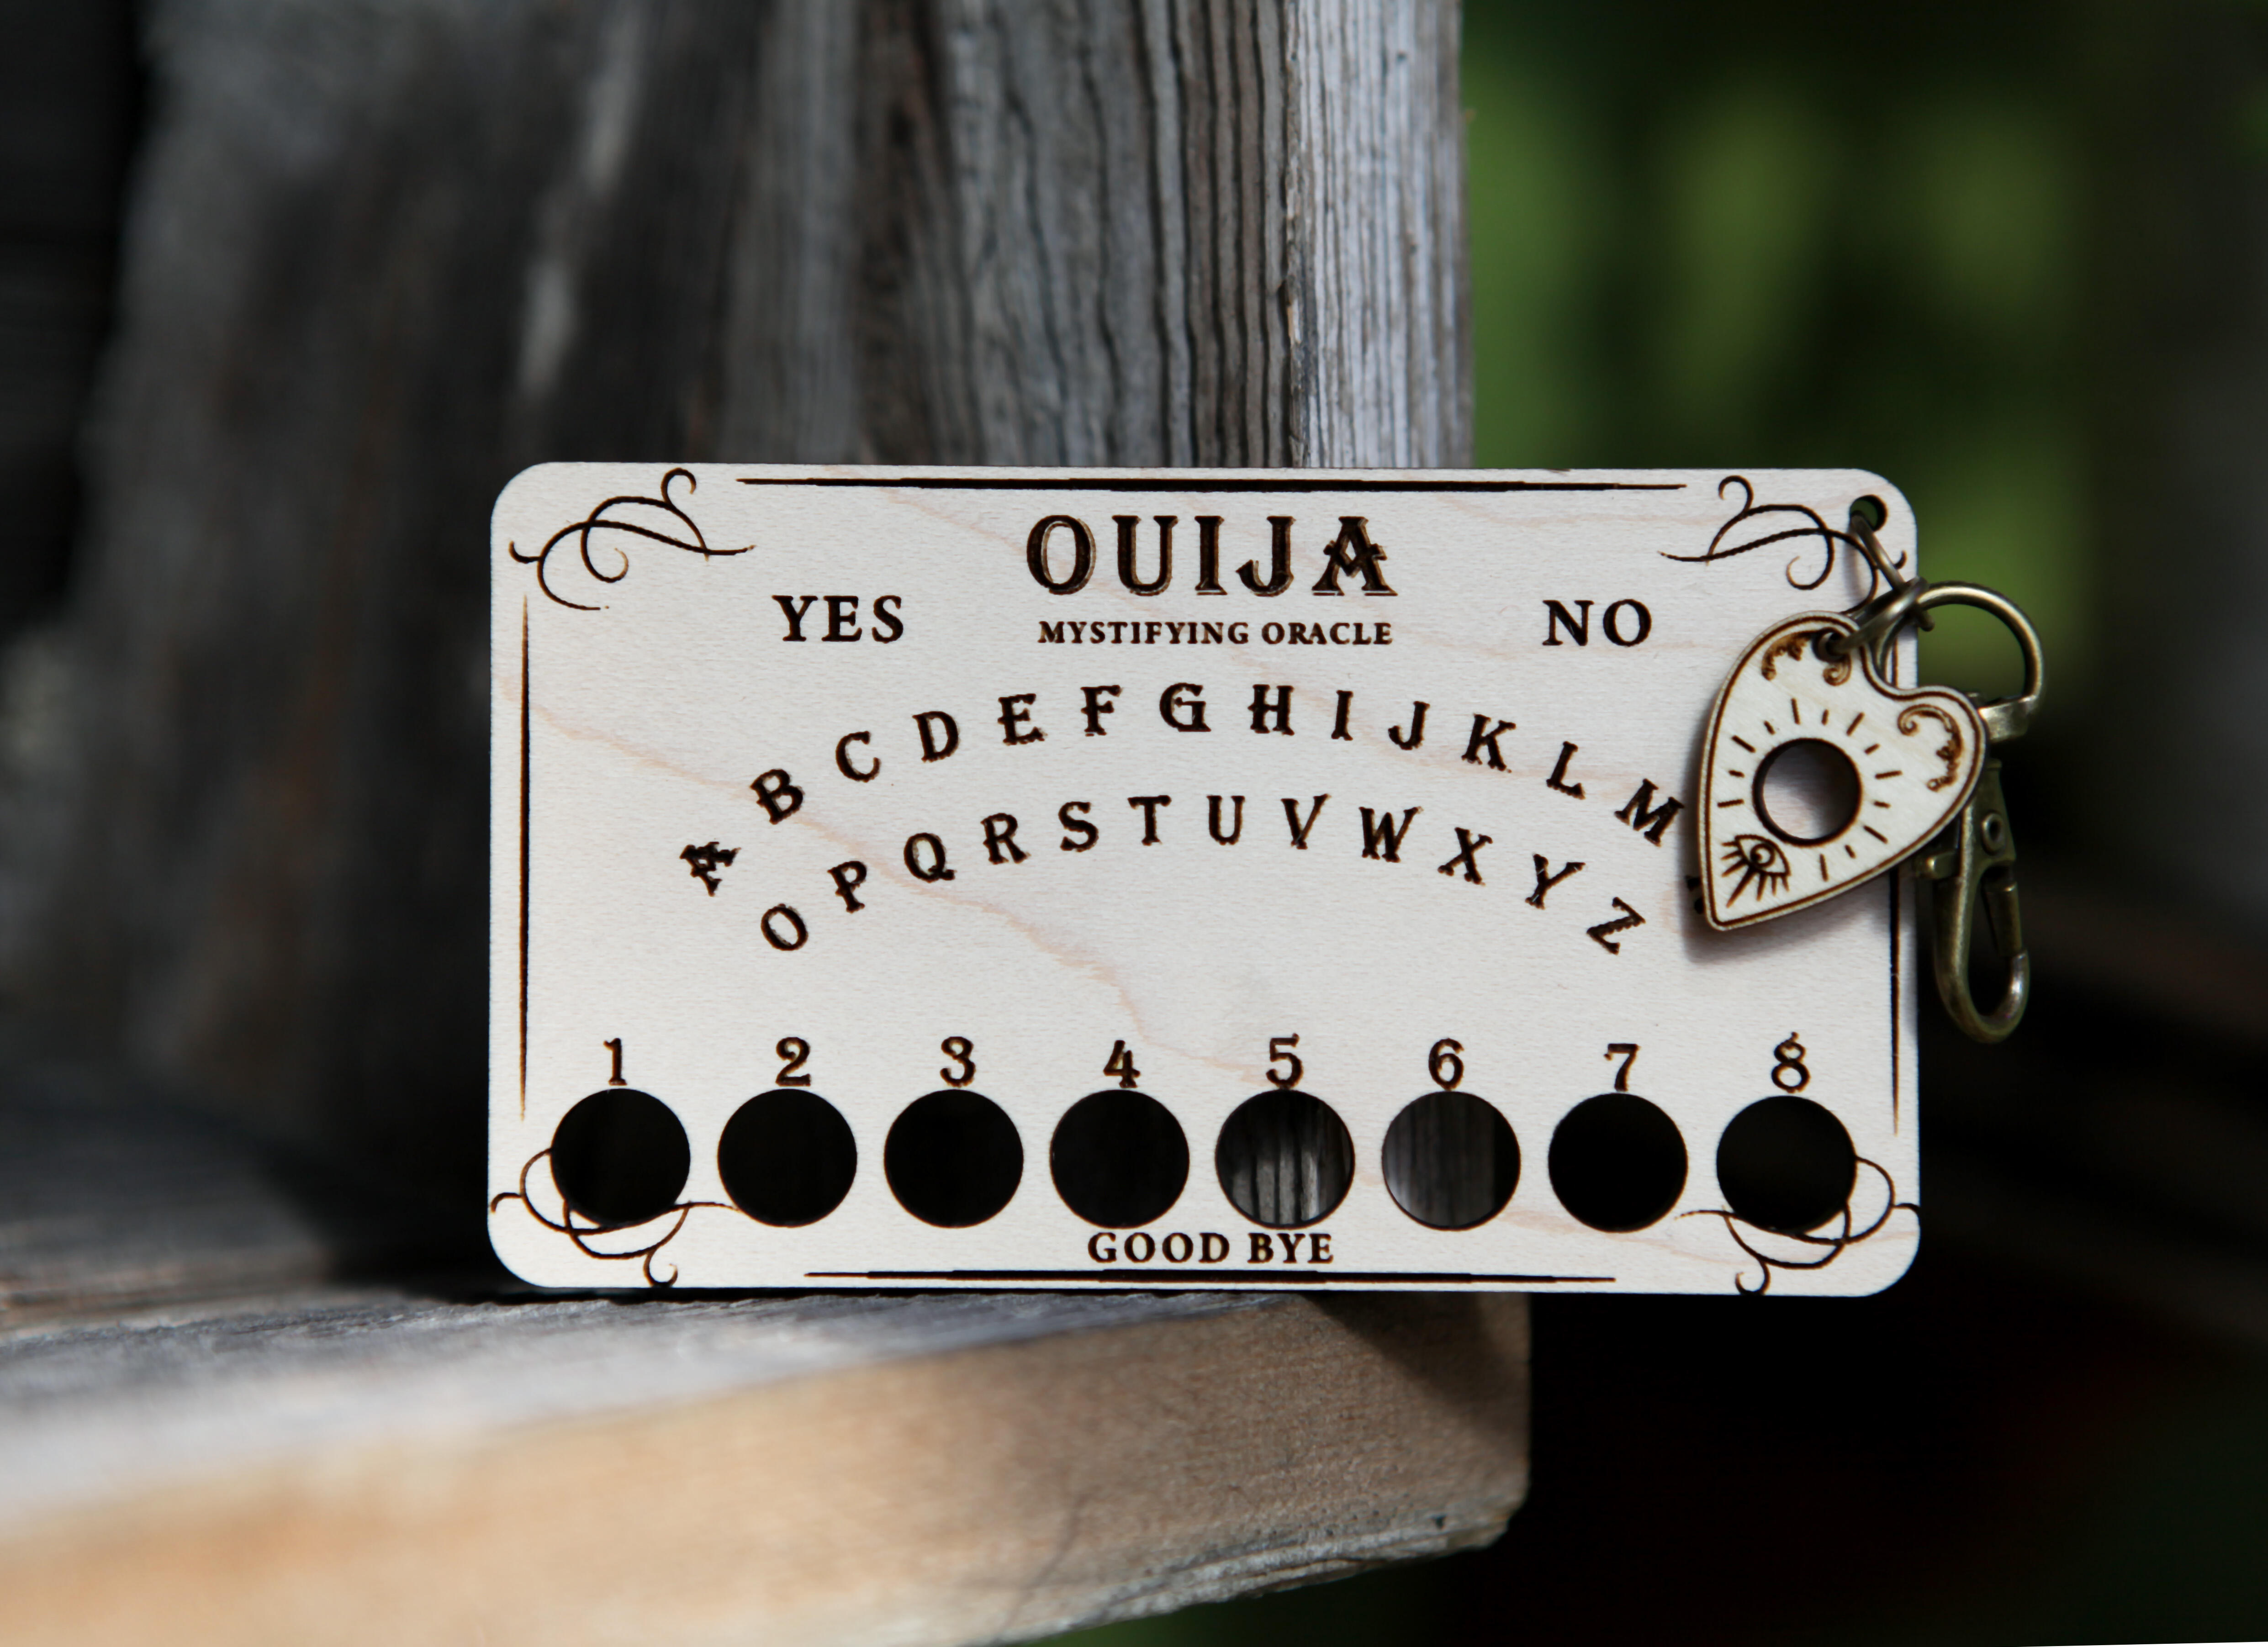 Another Ouija Planchette Halloween Magnetic Needle Minder for Cross Stitch